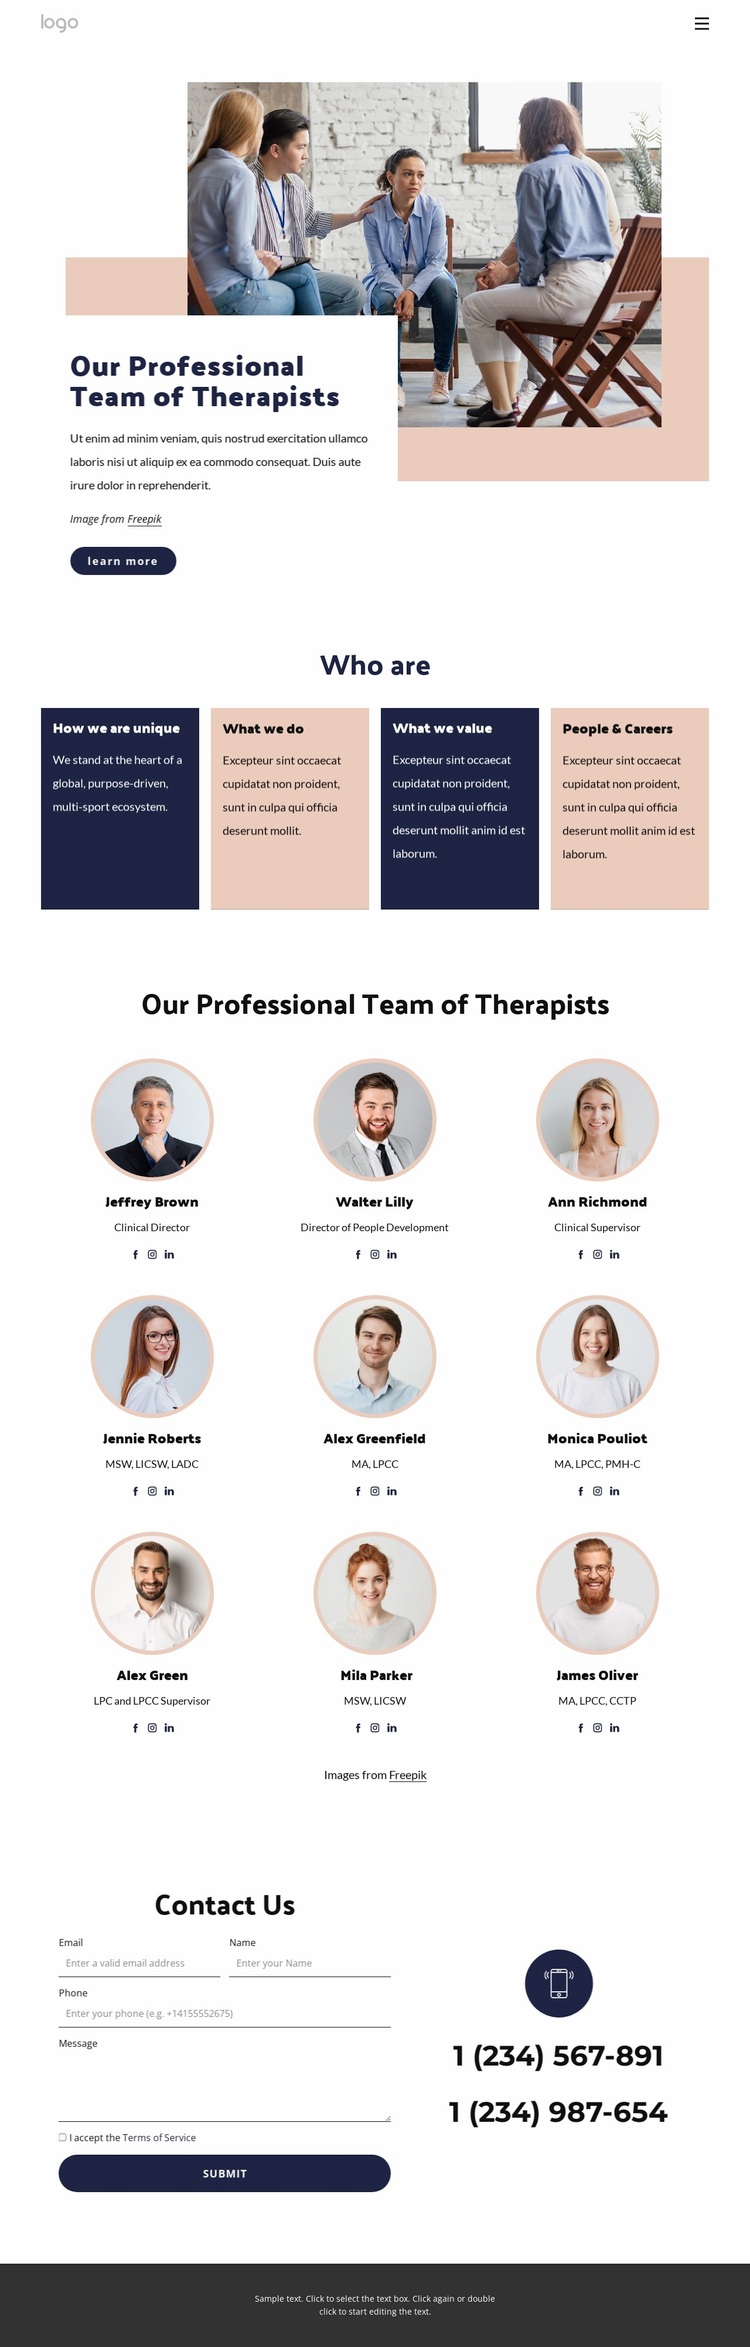 Our professional team of therapists Website Design